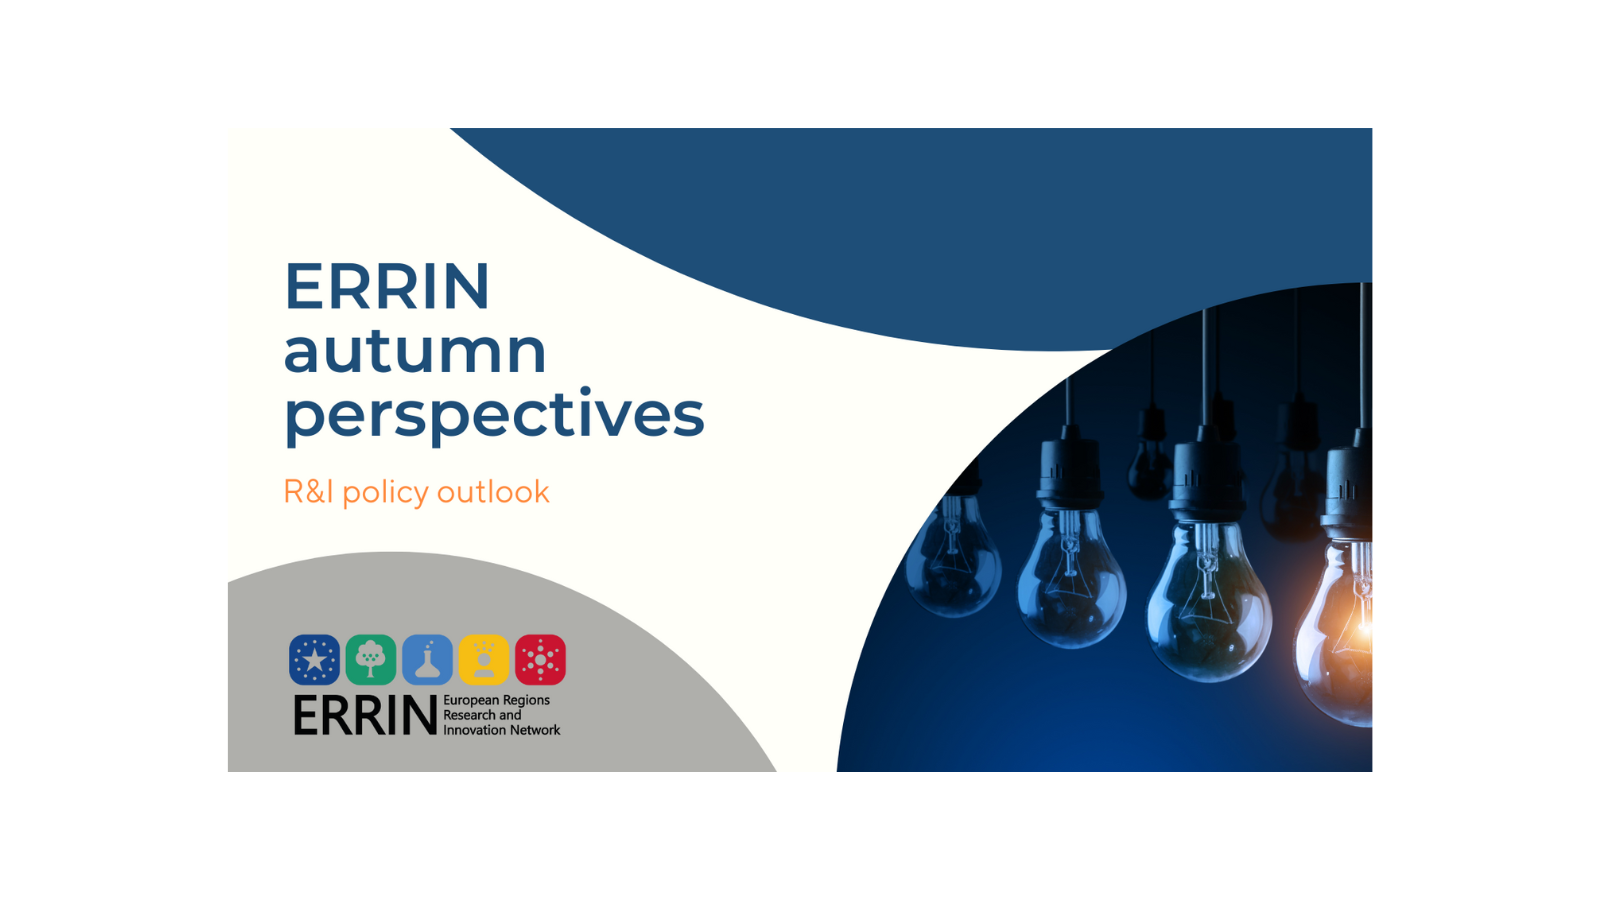 ERRIN autumn perspectives: R&I policy outlook